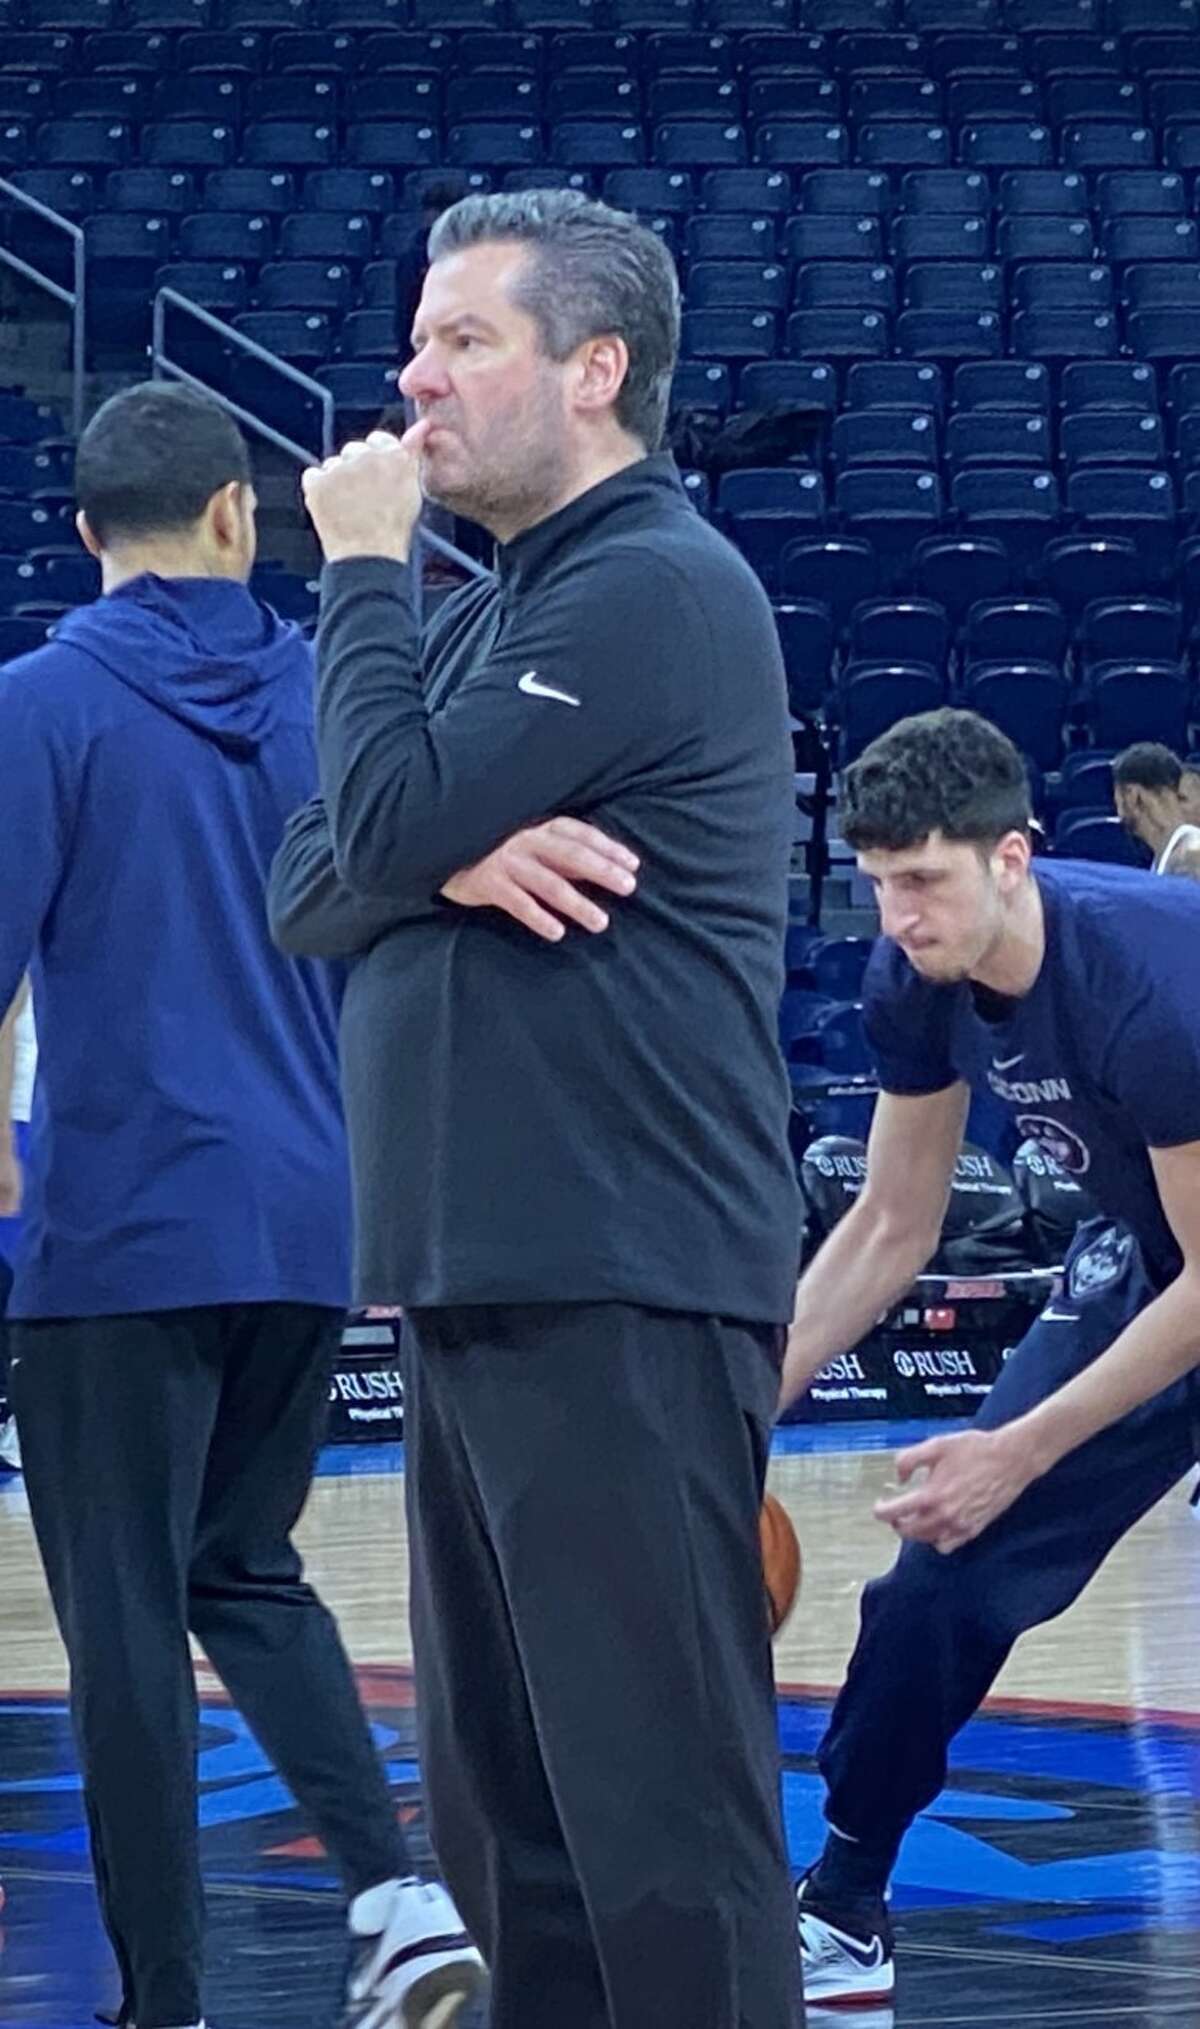 UConn assistant coach Tom Moore boasted a little growth of stubble for Tuesday night's game.